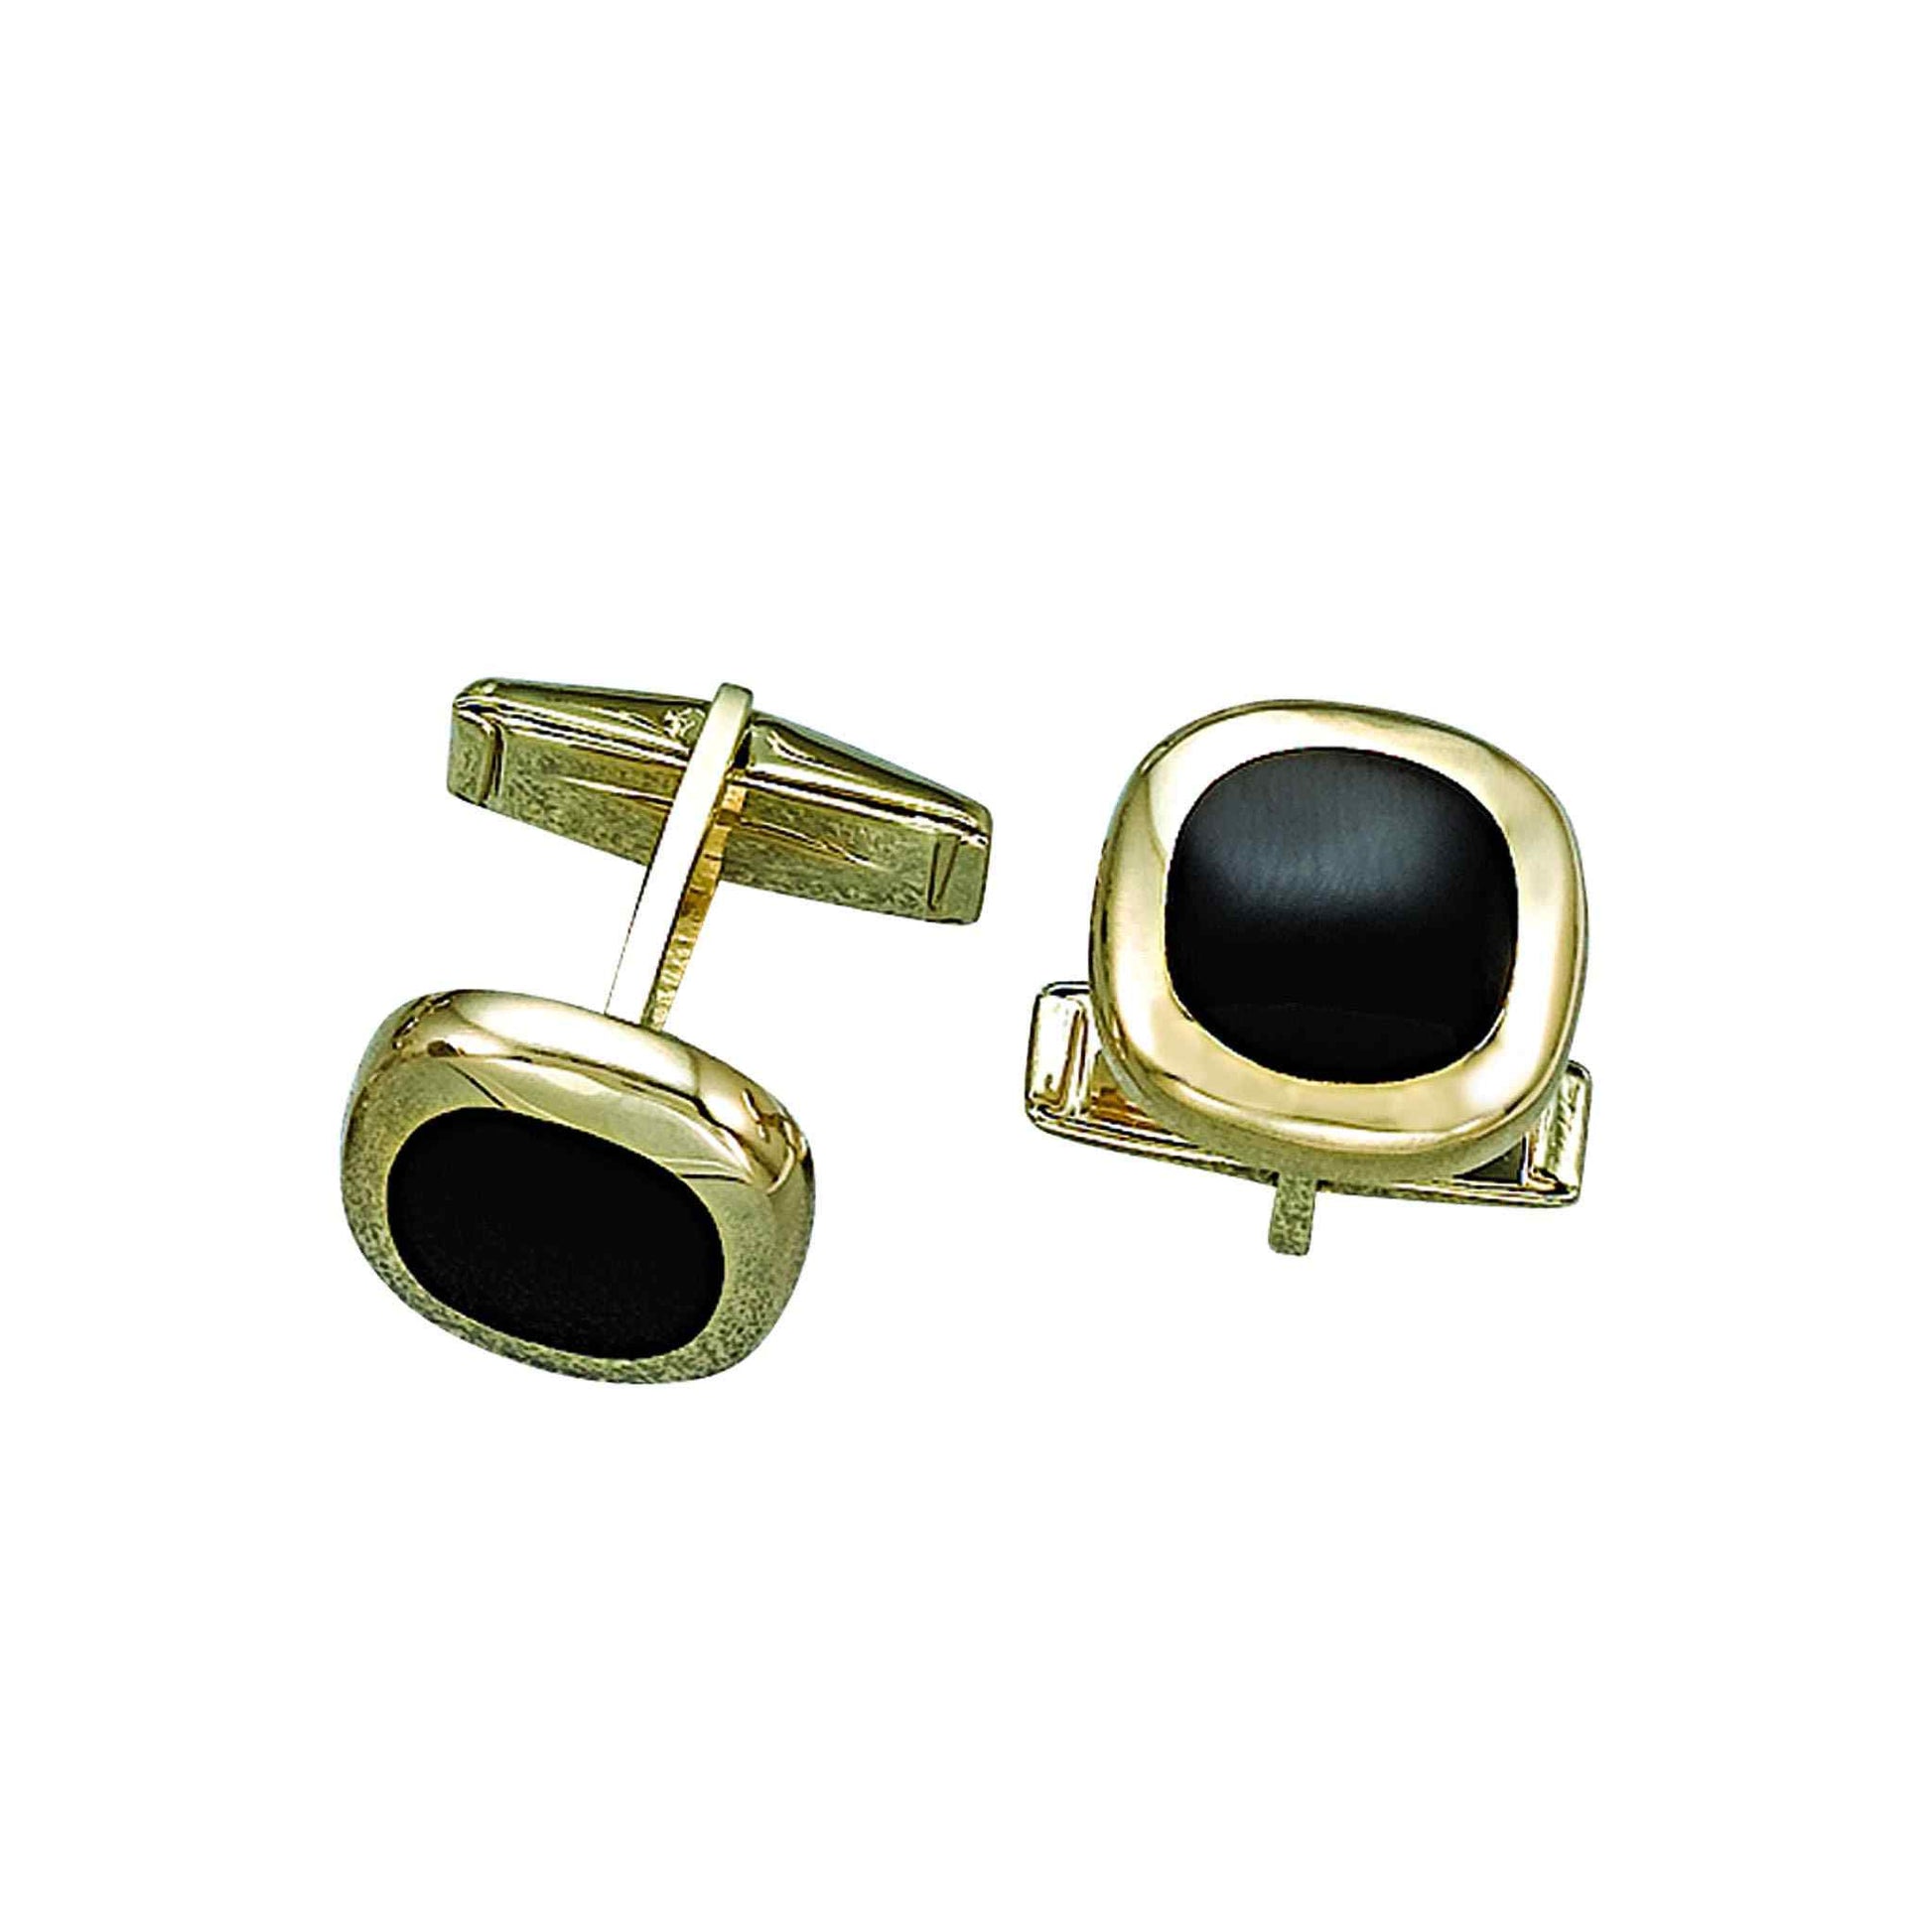 A 14k yellow gold cushion with onyx center displayed on a neutral white background.